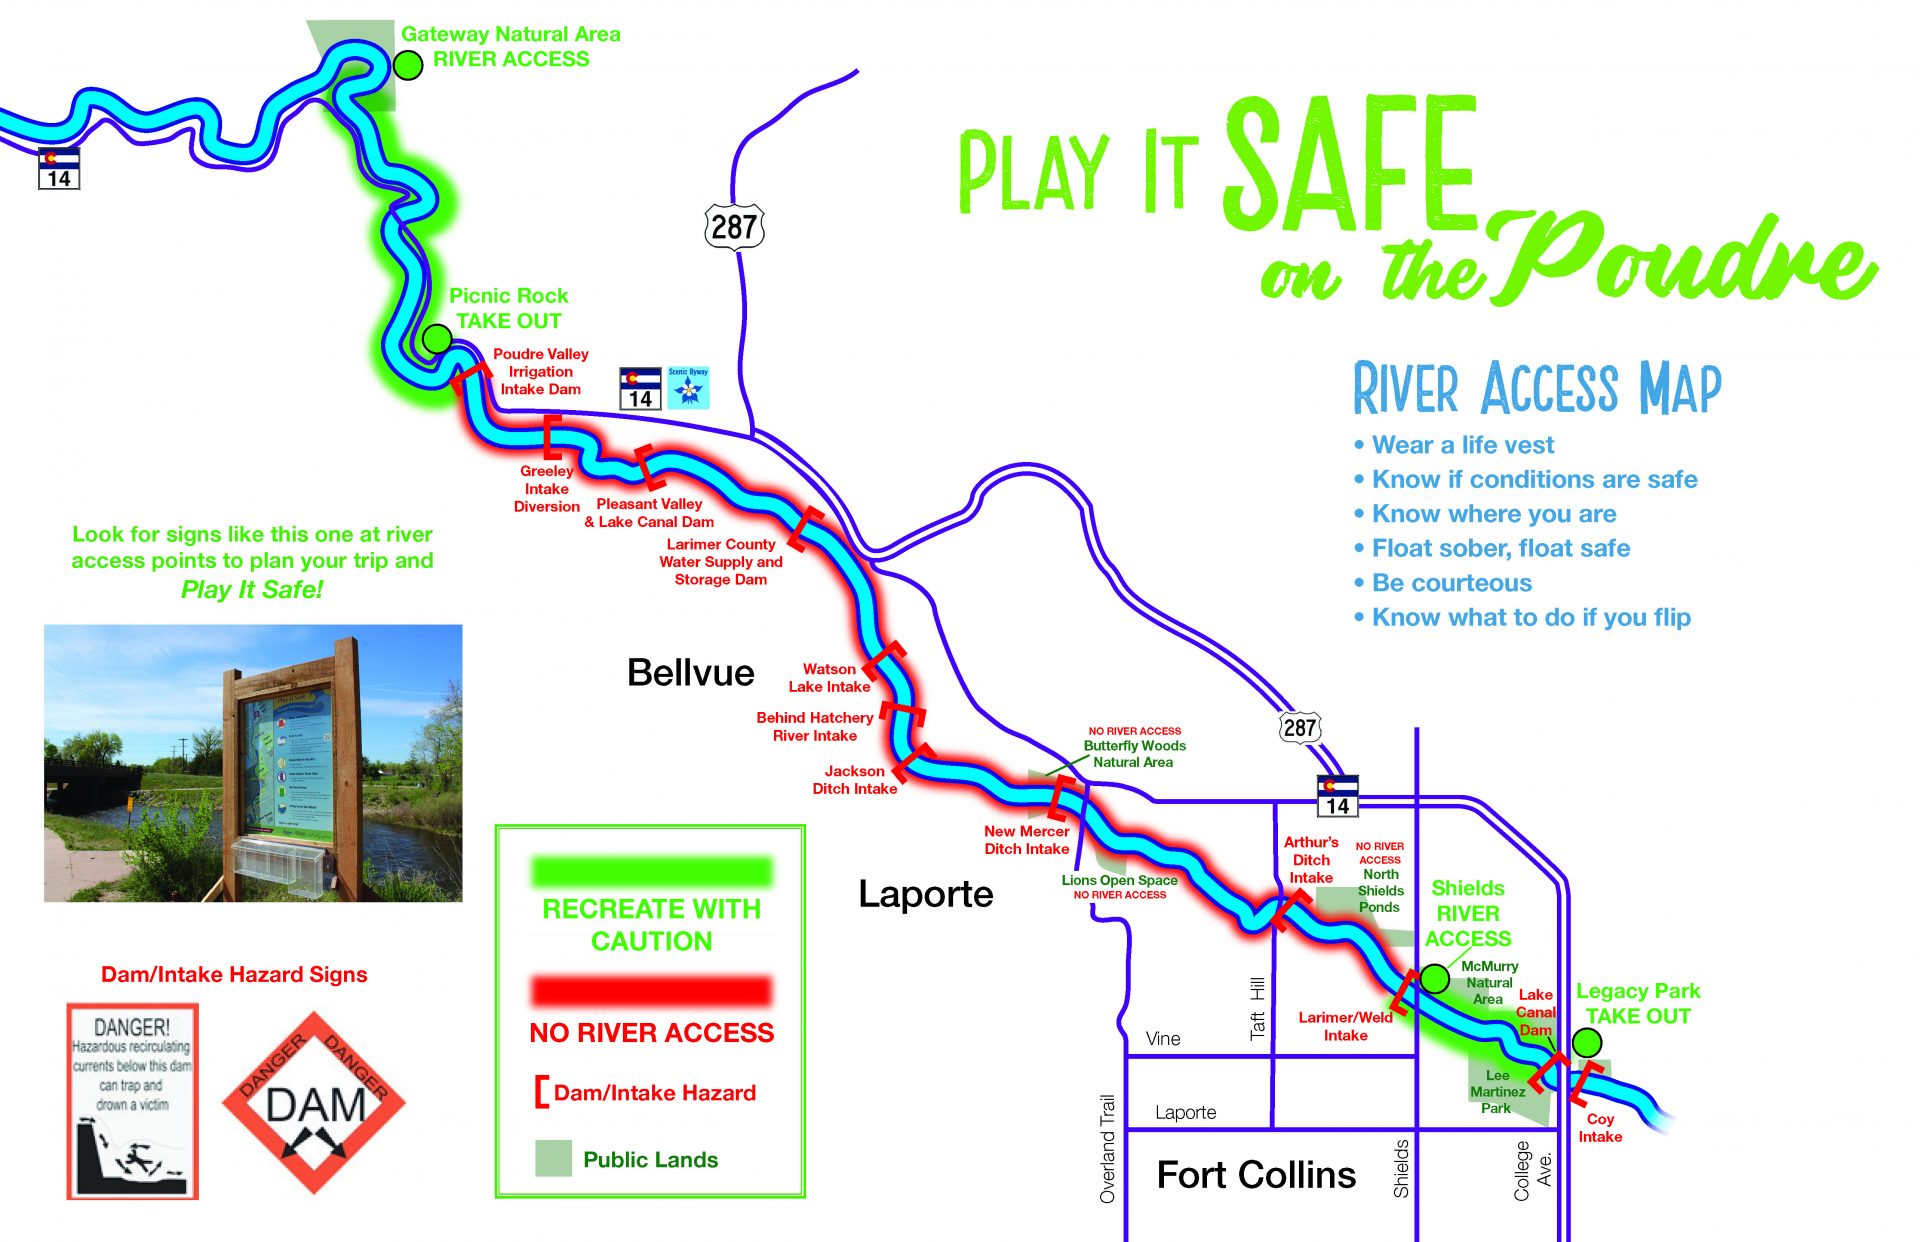 Play it Safe on the Poudre – News Release